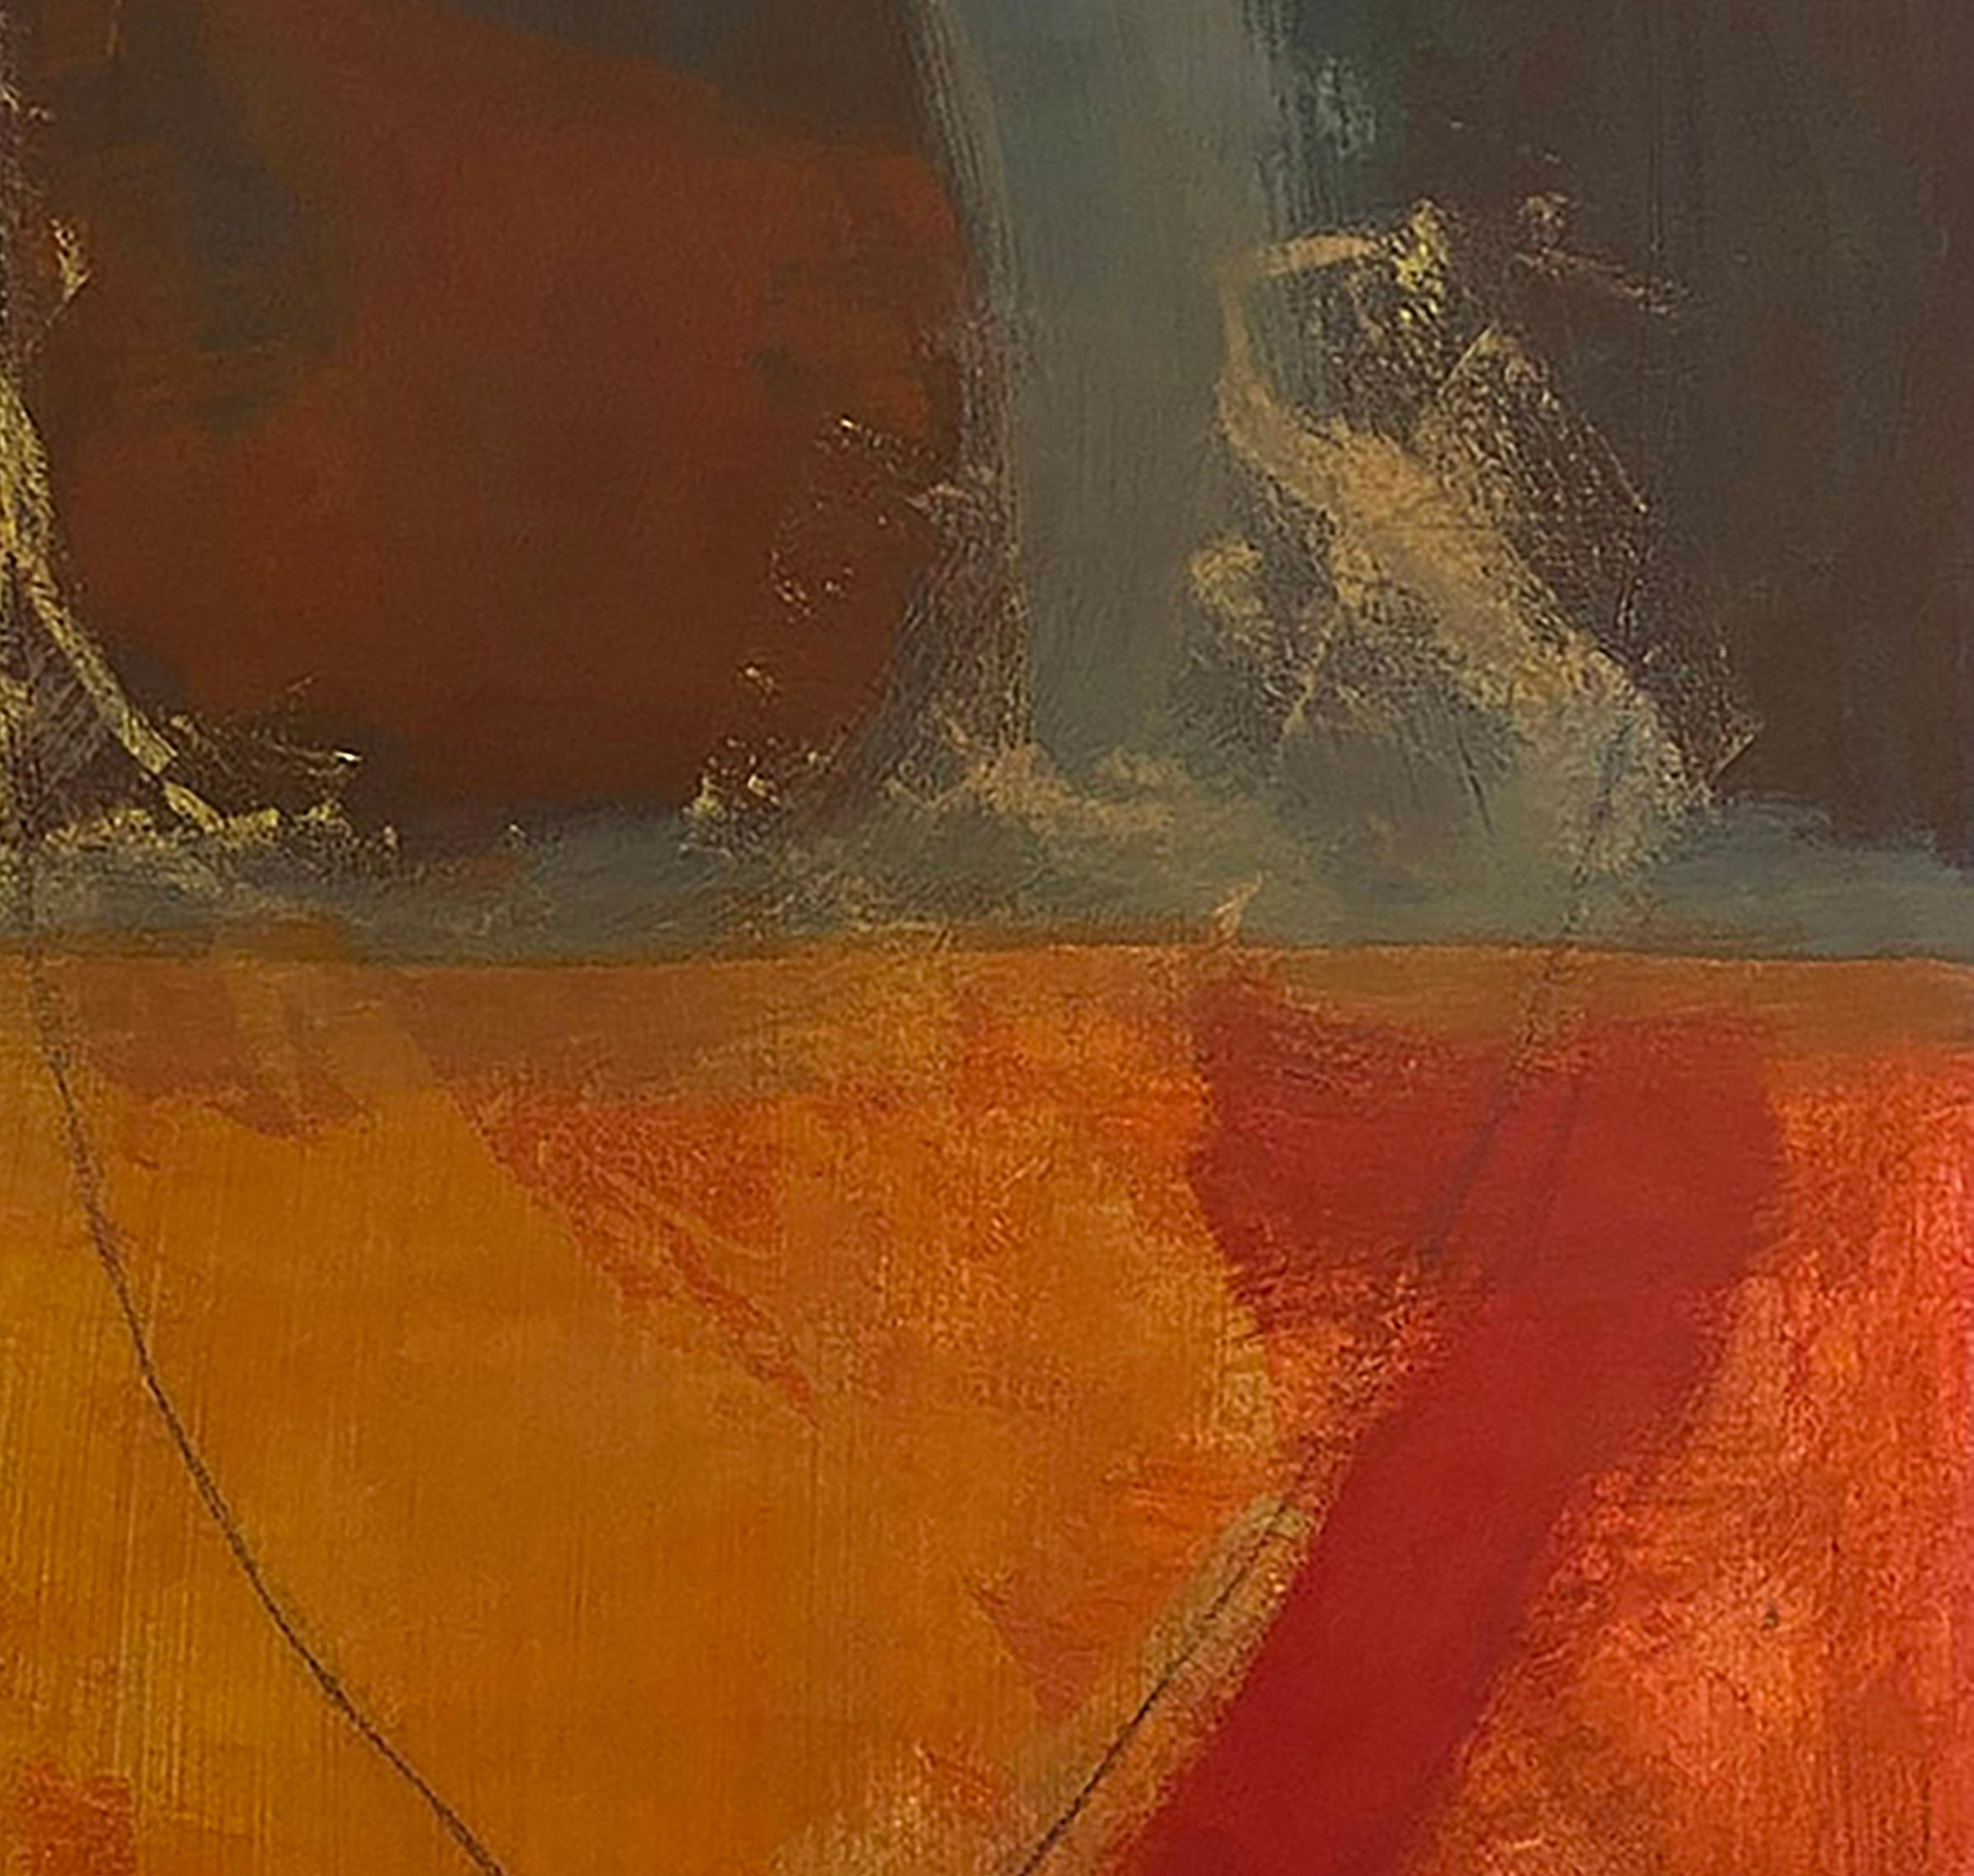 Ted Dixon is a Black painter working primarily in abstraction. He writes: 